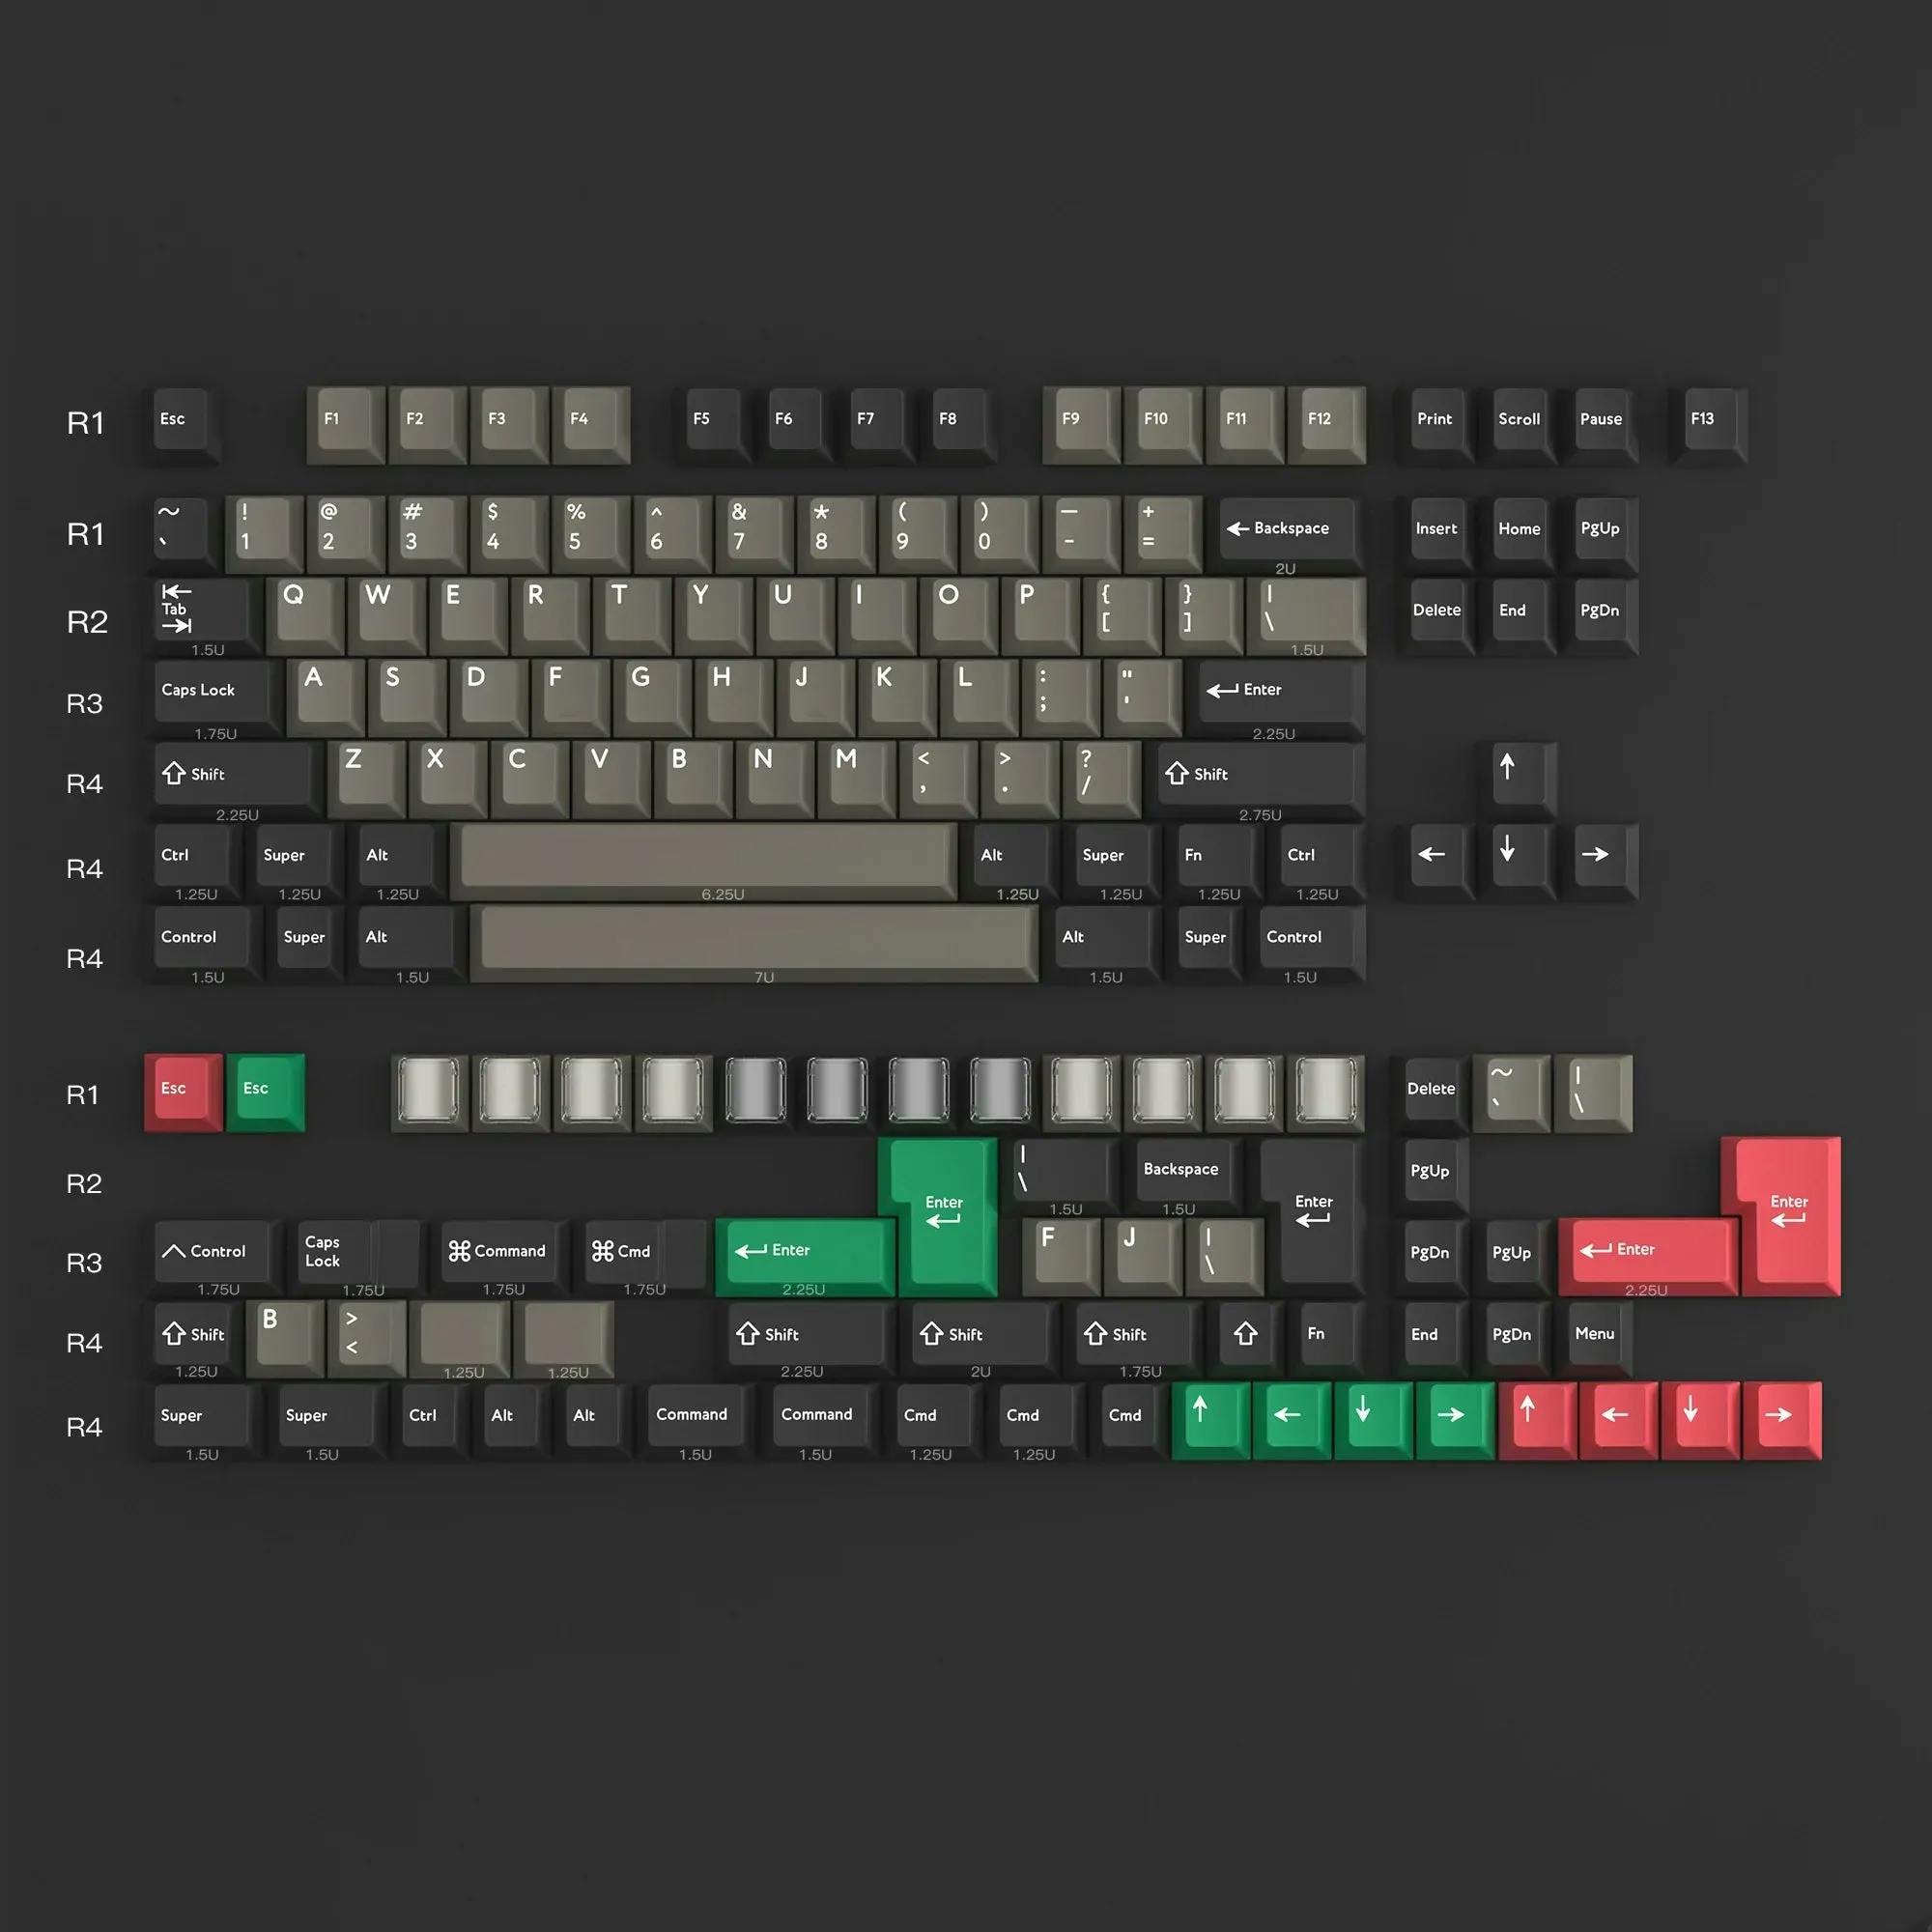 Image for PBTfans Dolch Keycap Set Doubleshot PBT